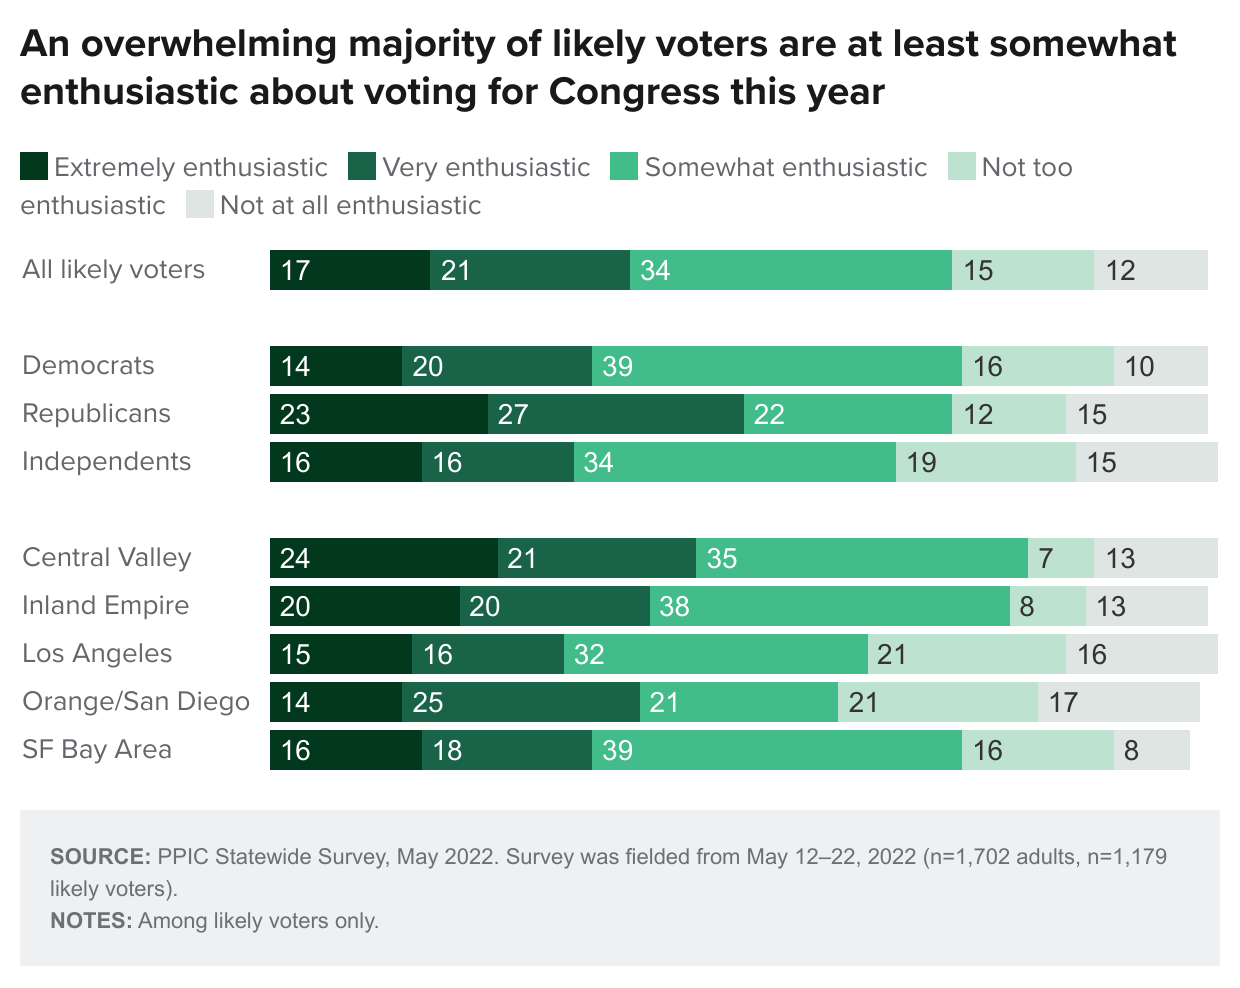 figure - An overwhelming majority of likely voters are at least somewhat enthusiastic about voting for Congress this year